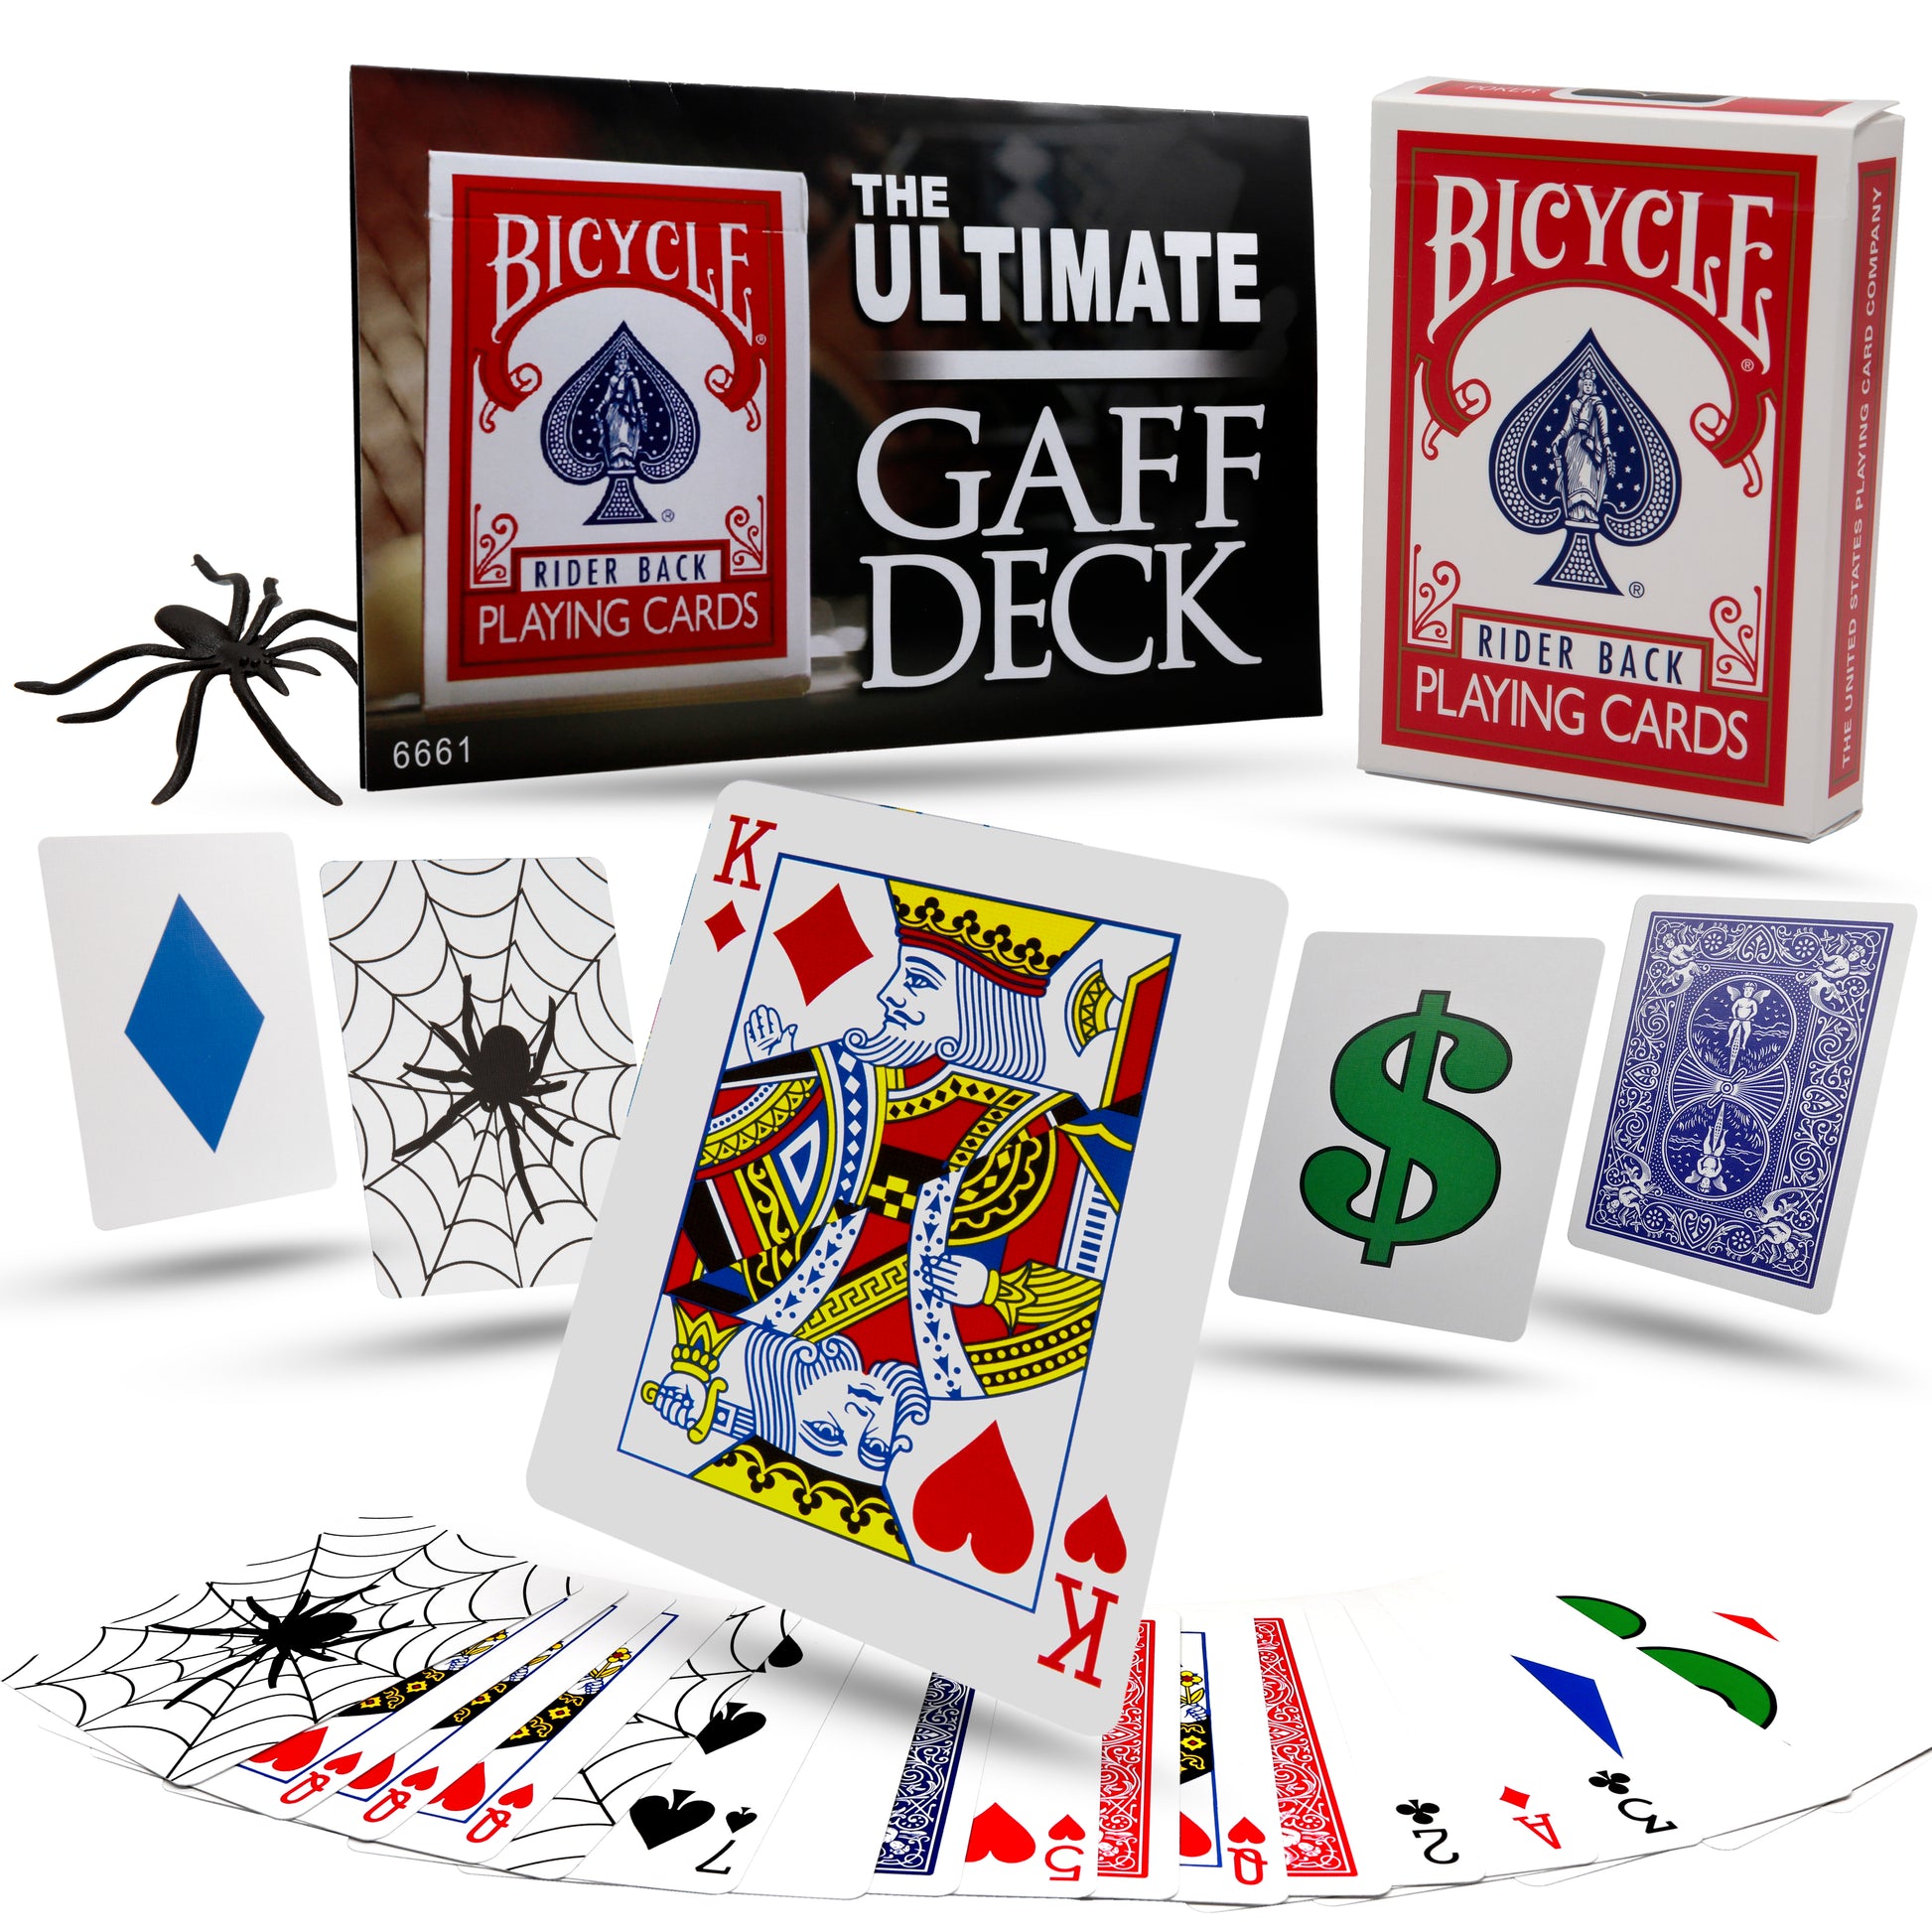 Magic Gaff Cards by Magic Makers - Ultimate Bicycle Gaff Deck